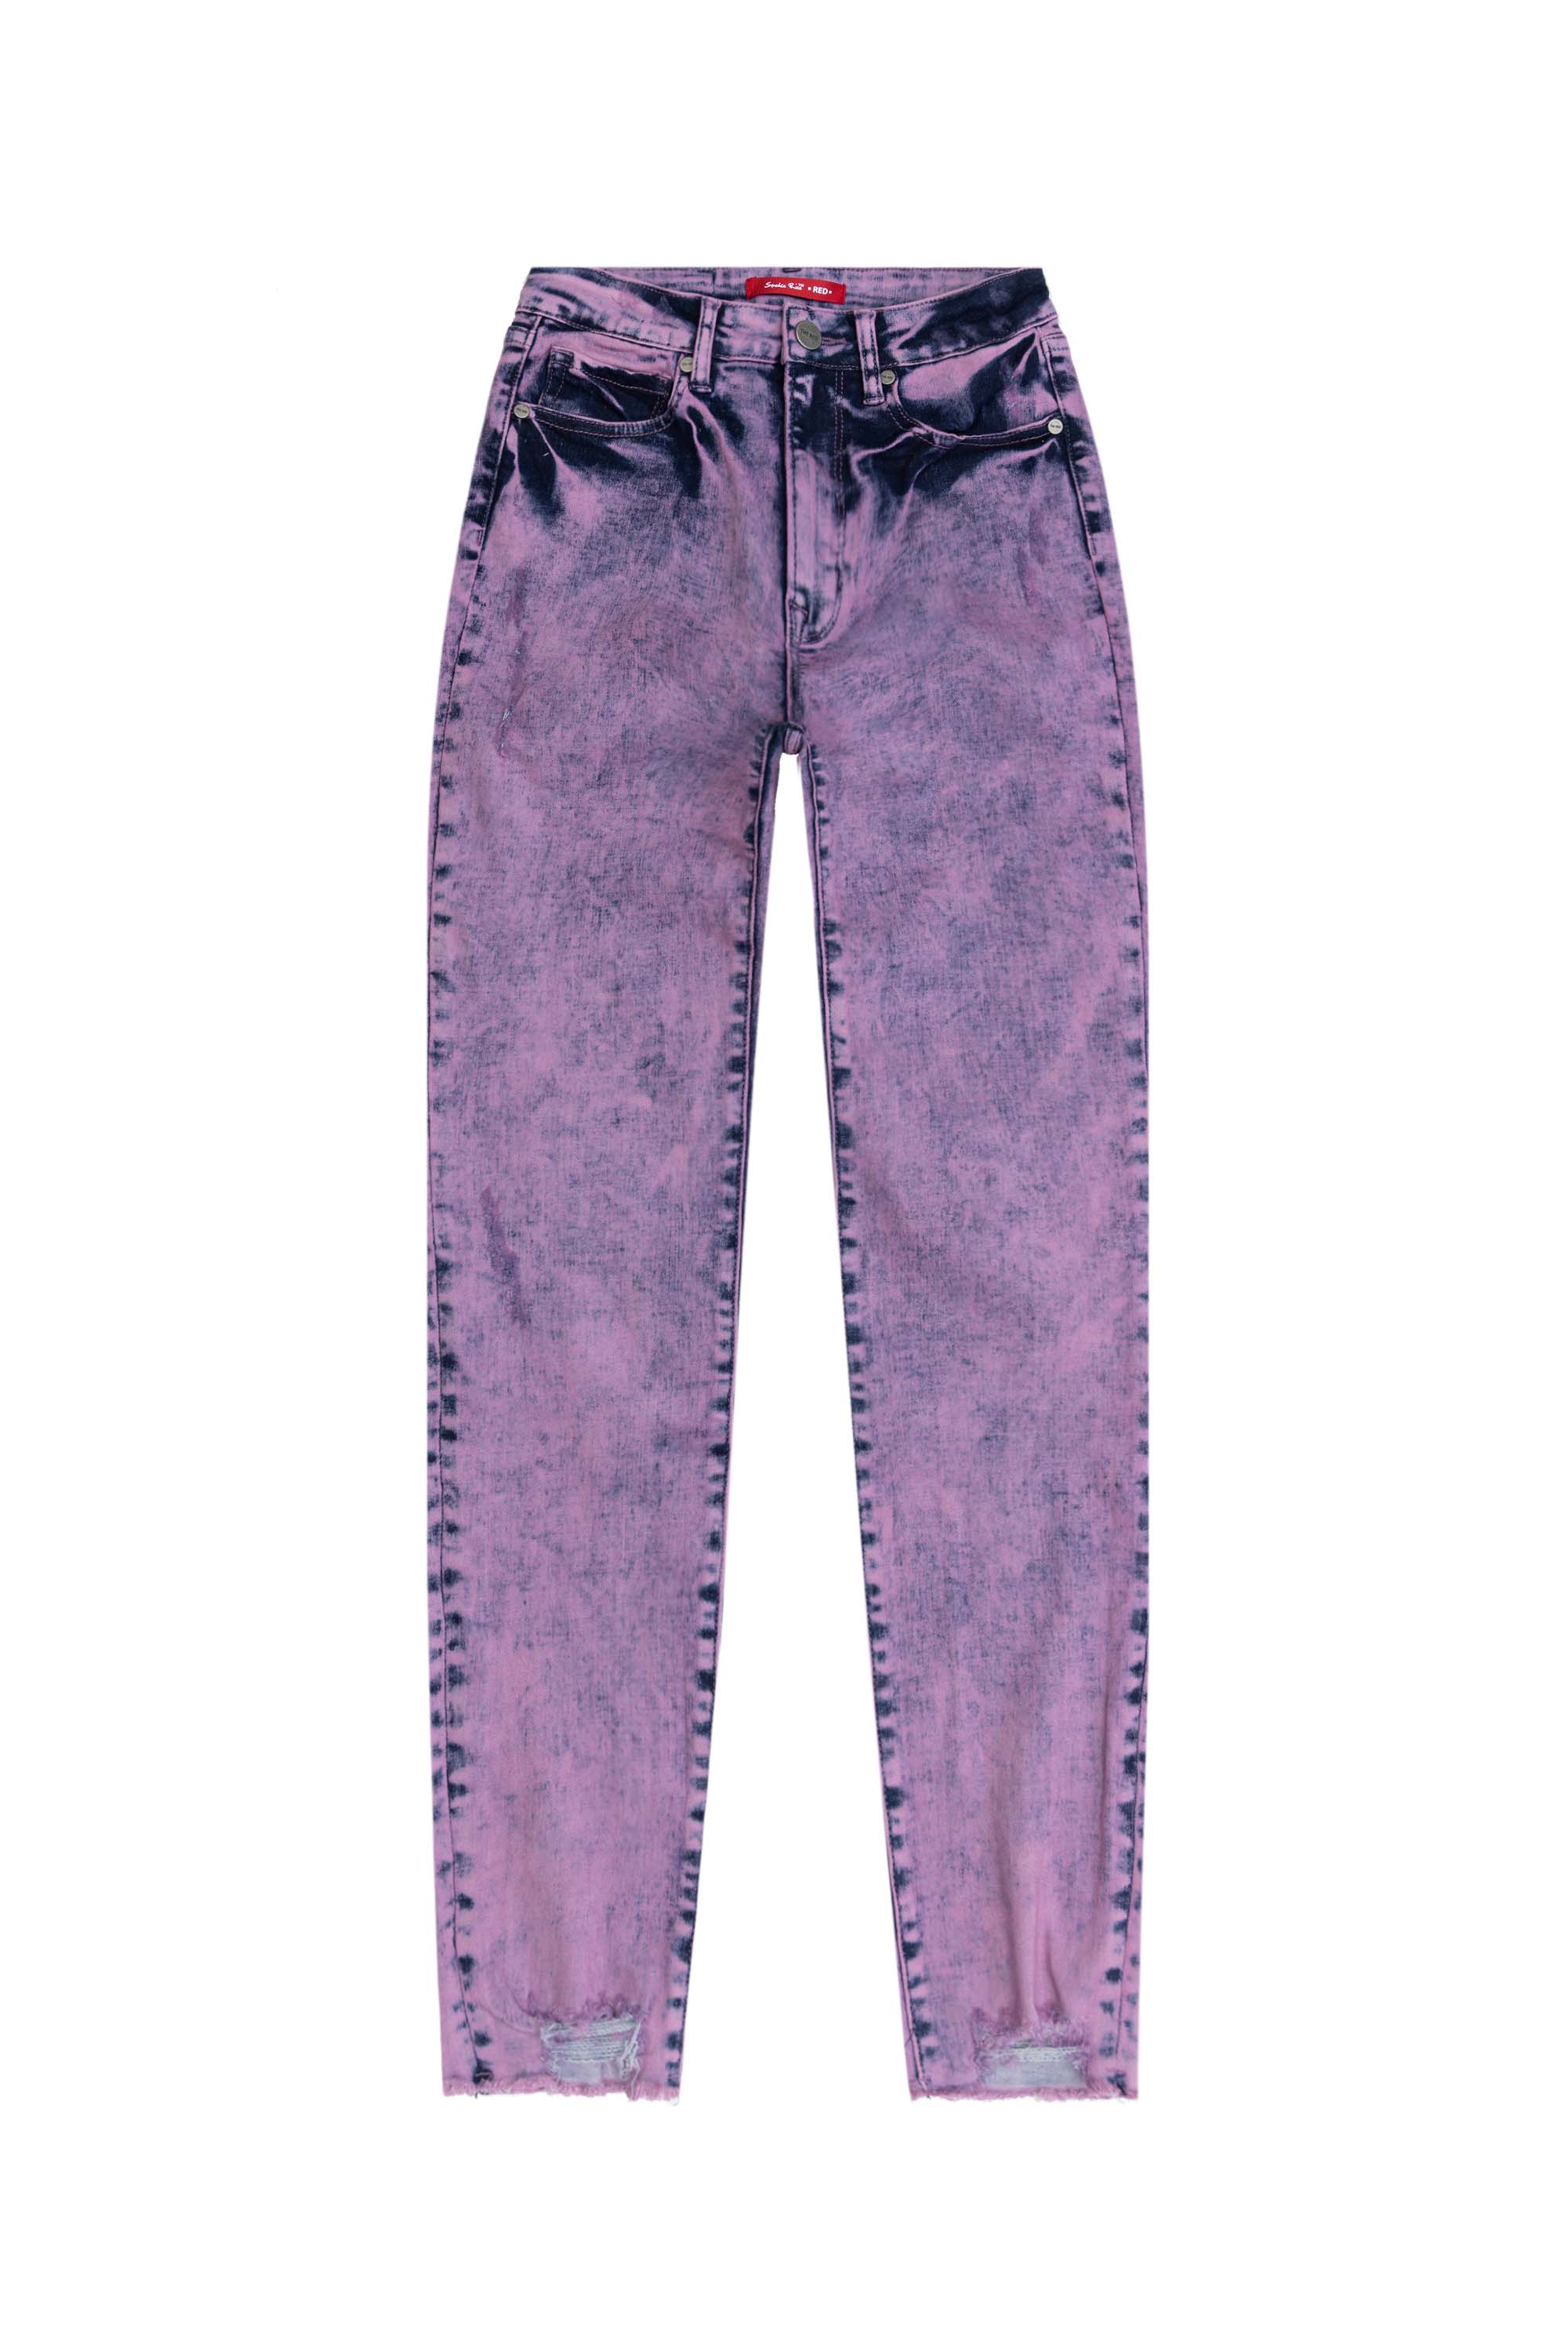 Over Dyed Fashion Denim Pants